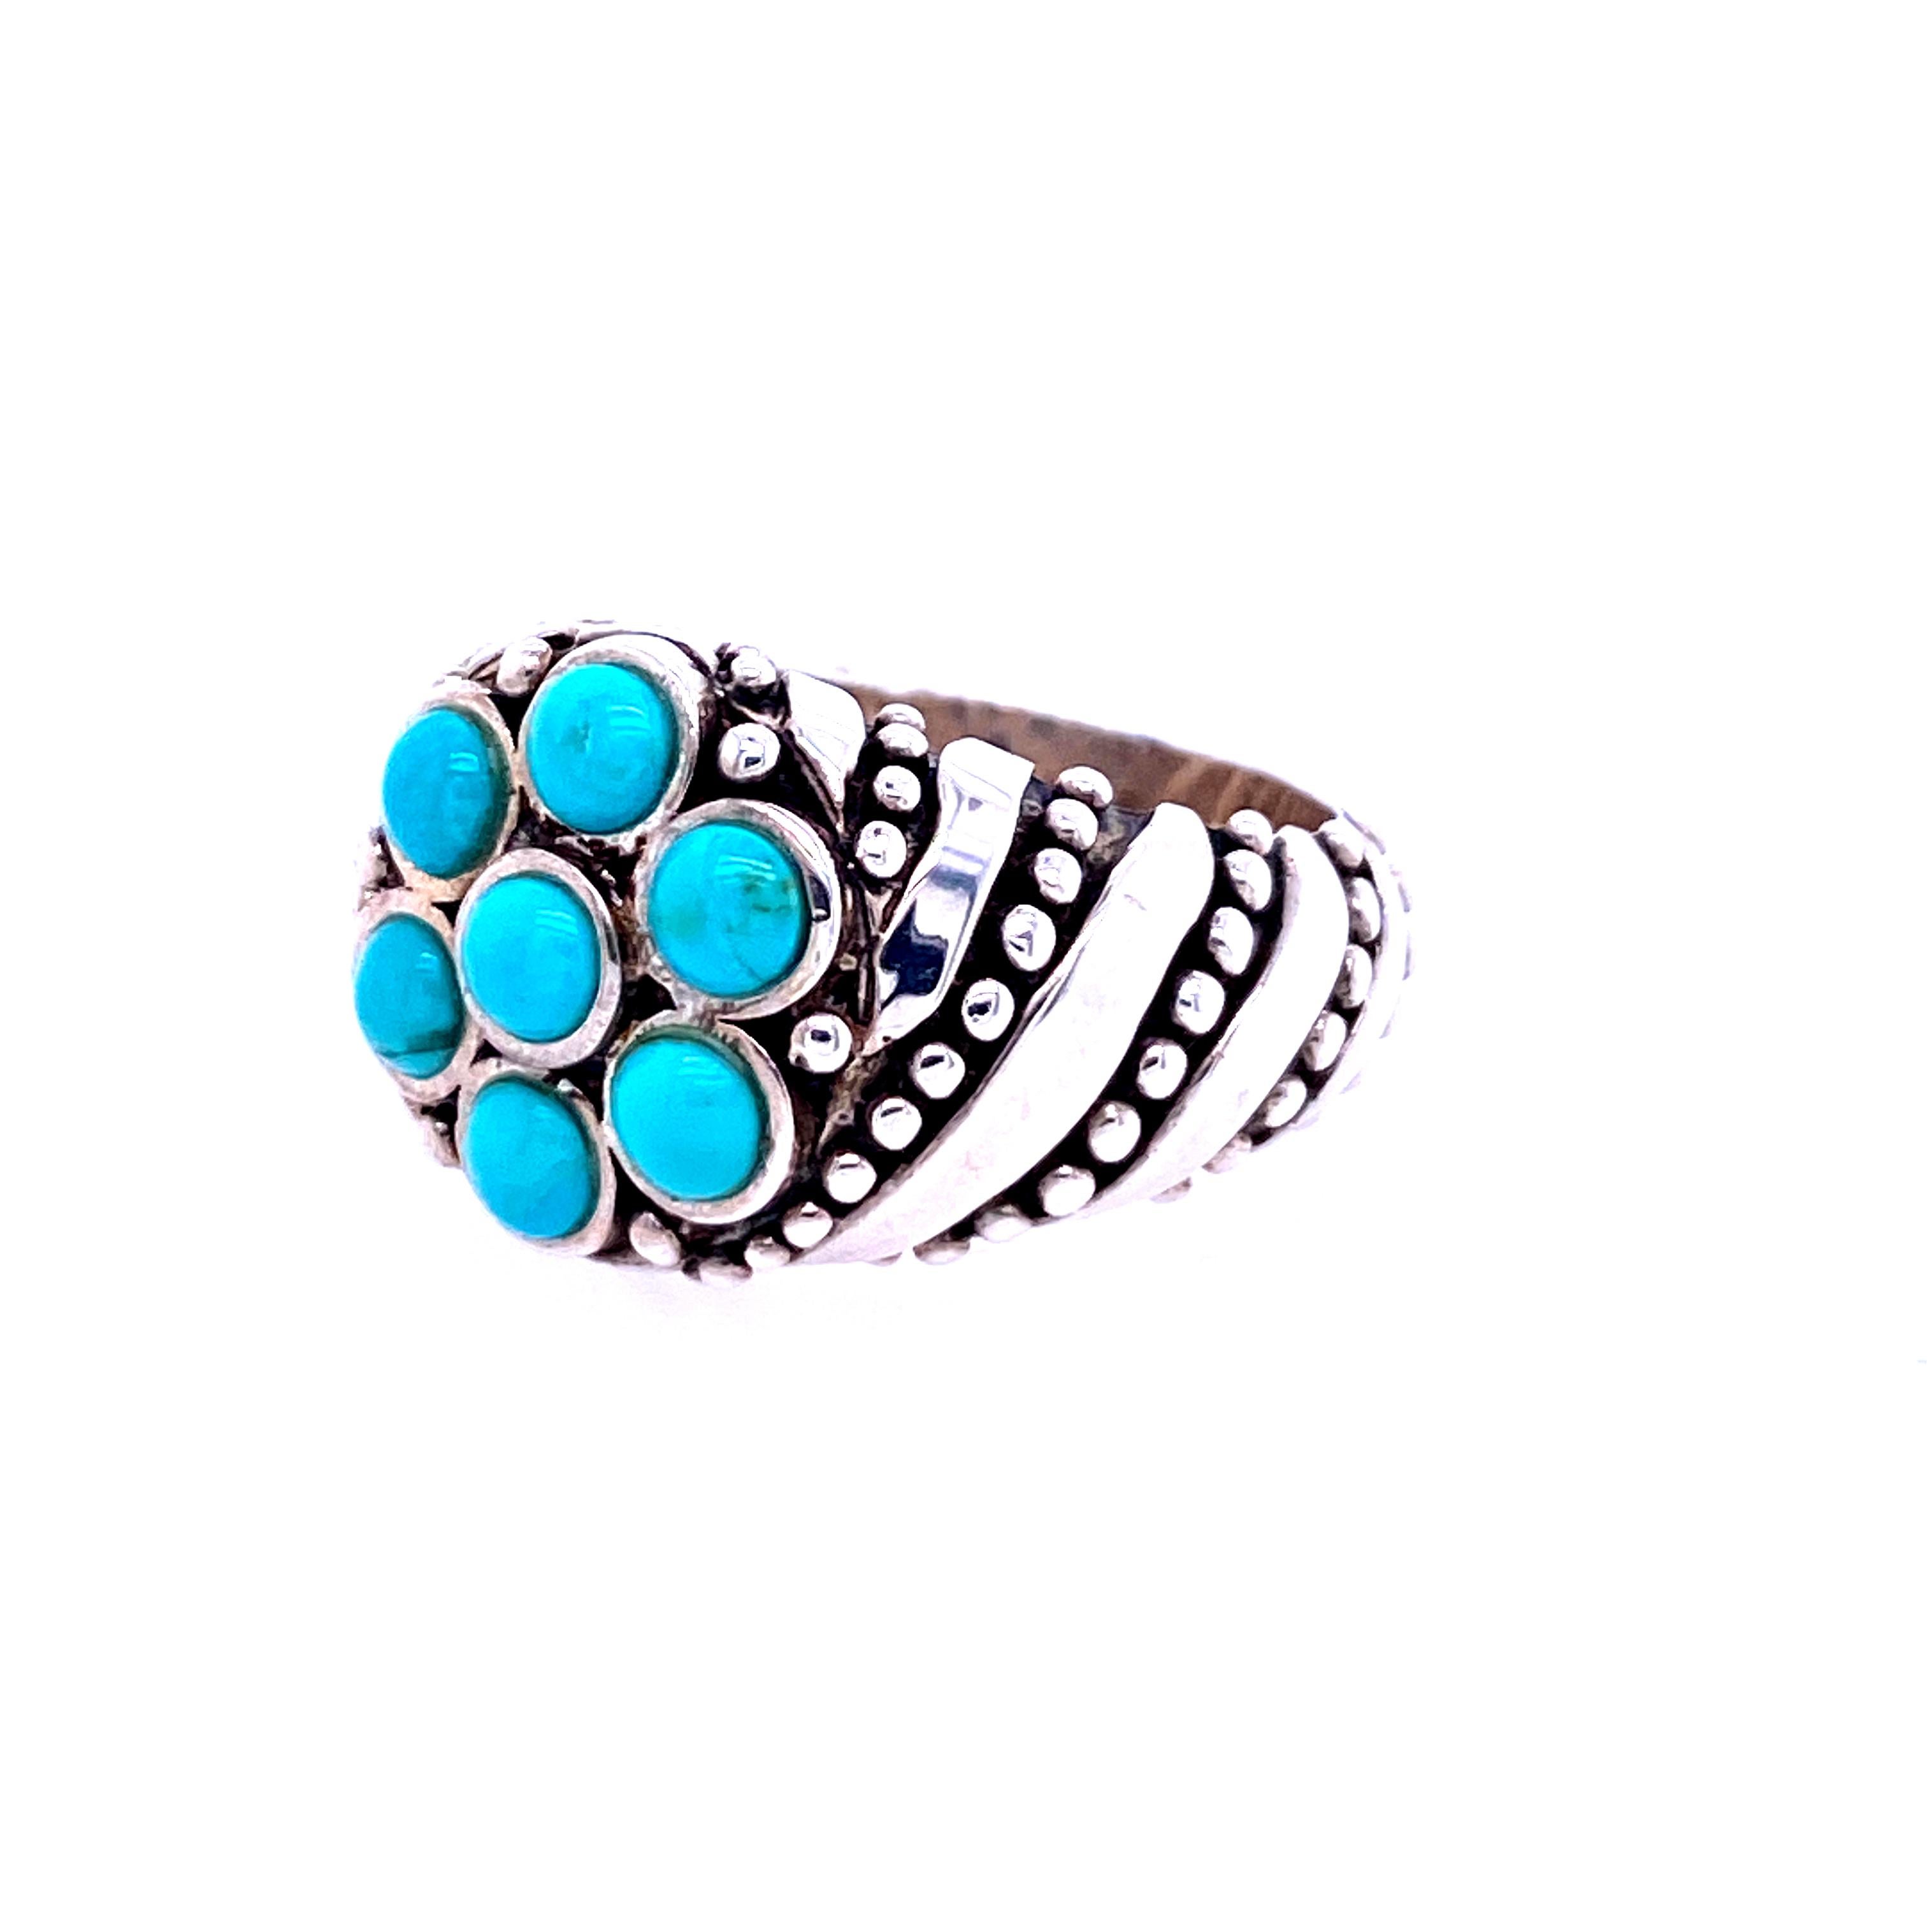 Contemporary 925 Sterling Silver and Turquoise Ring